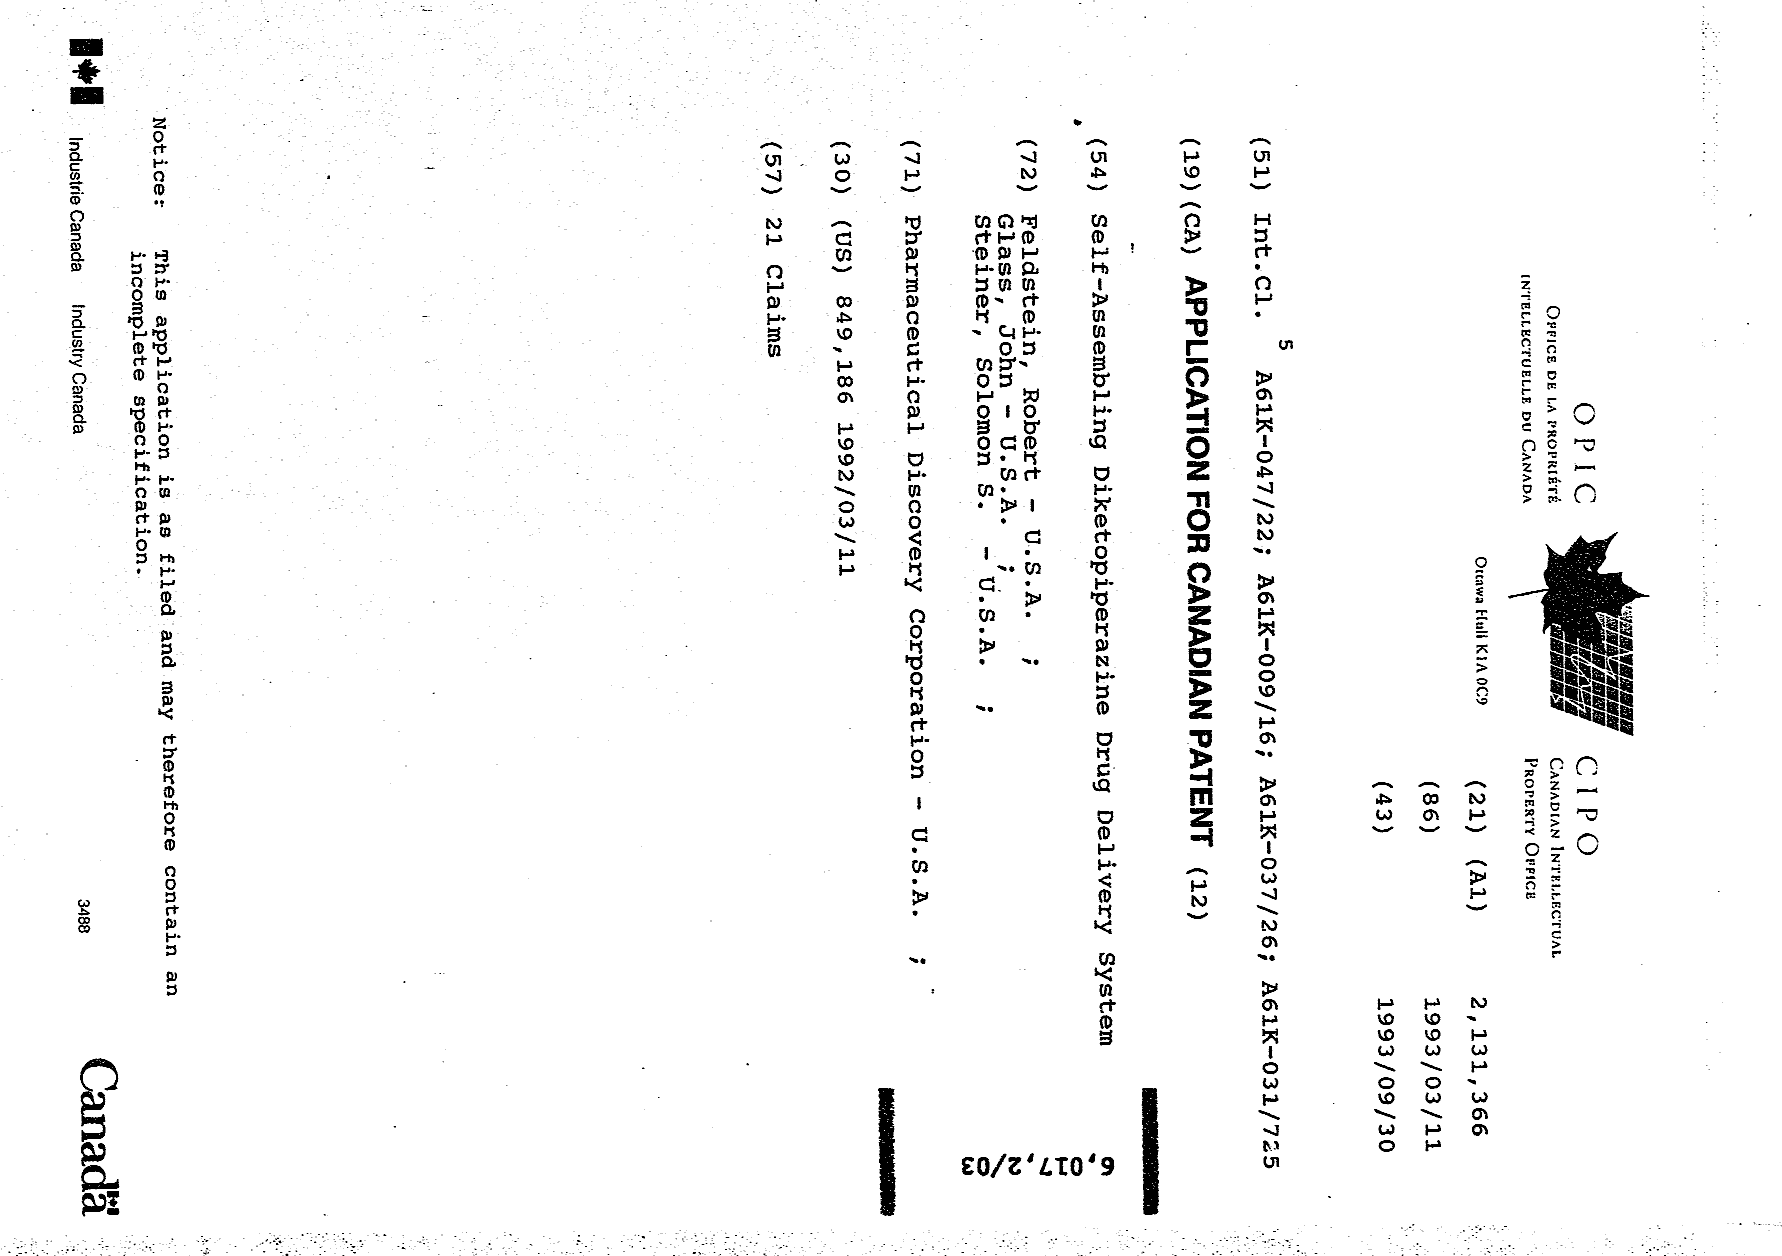 Canadian Patent Document 2131366. Cover Page 19950826. Image 1 of 1